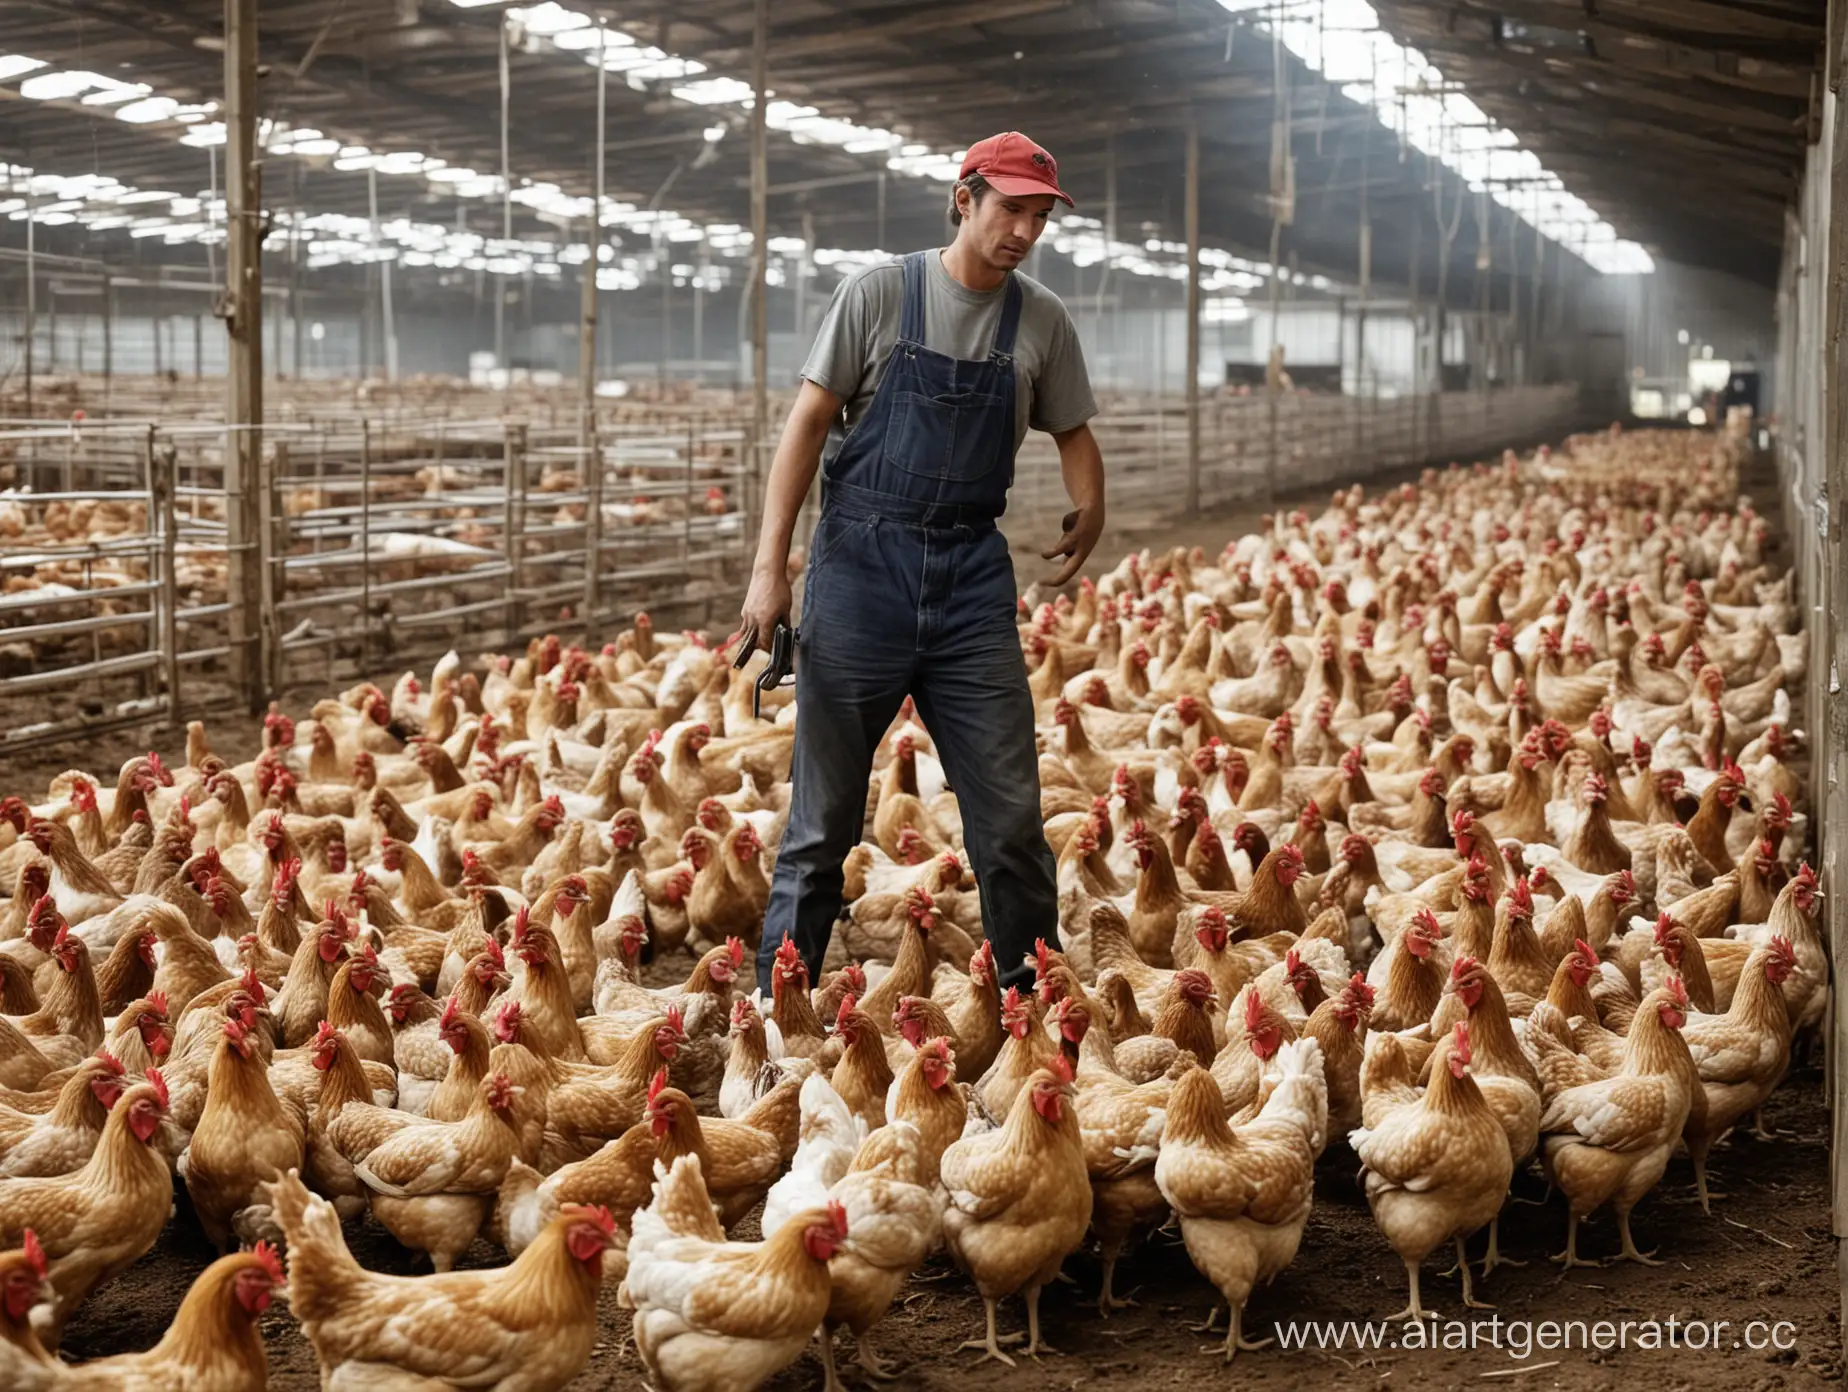 Worker-on-Poultry-Farm-with-Chickens